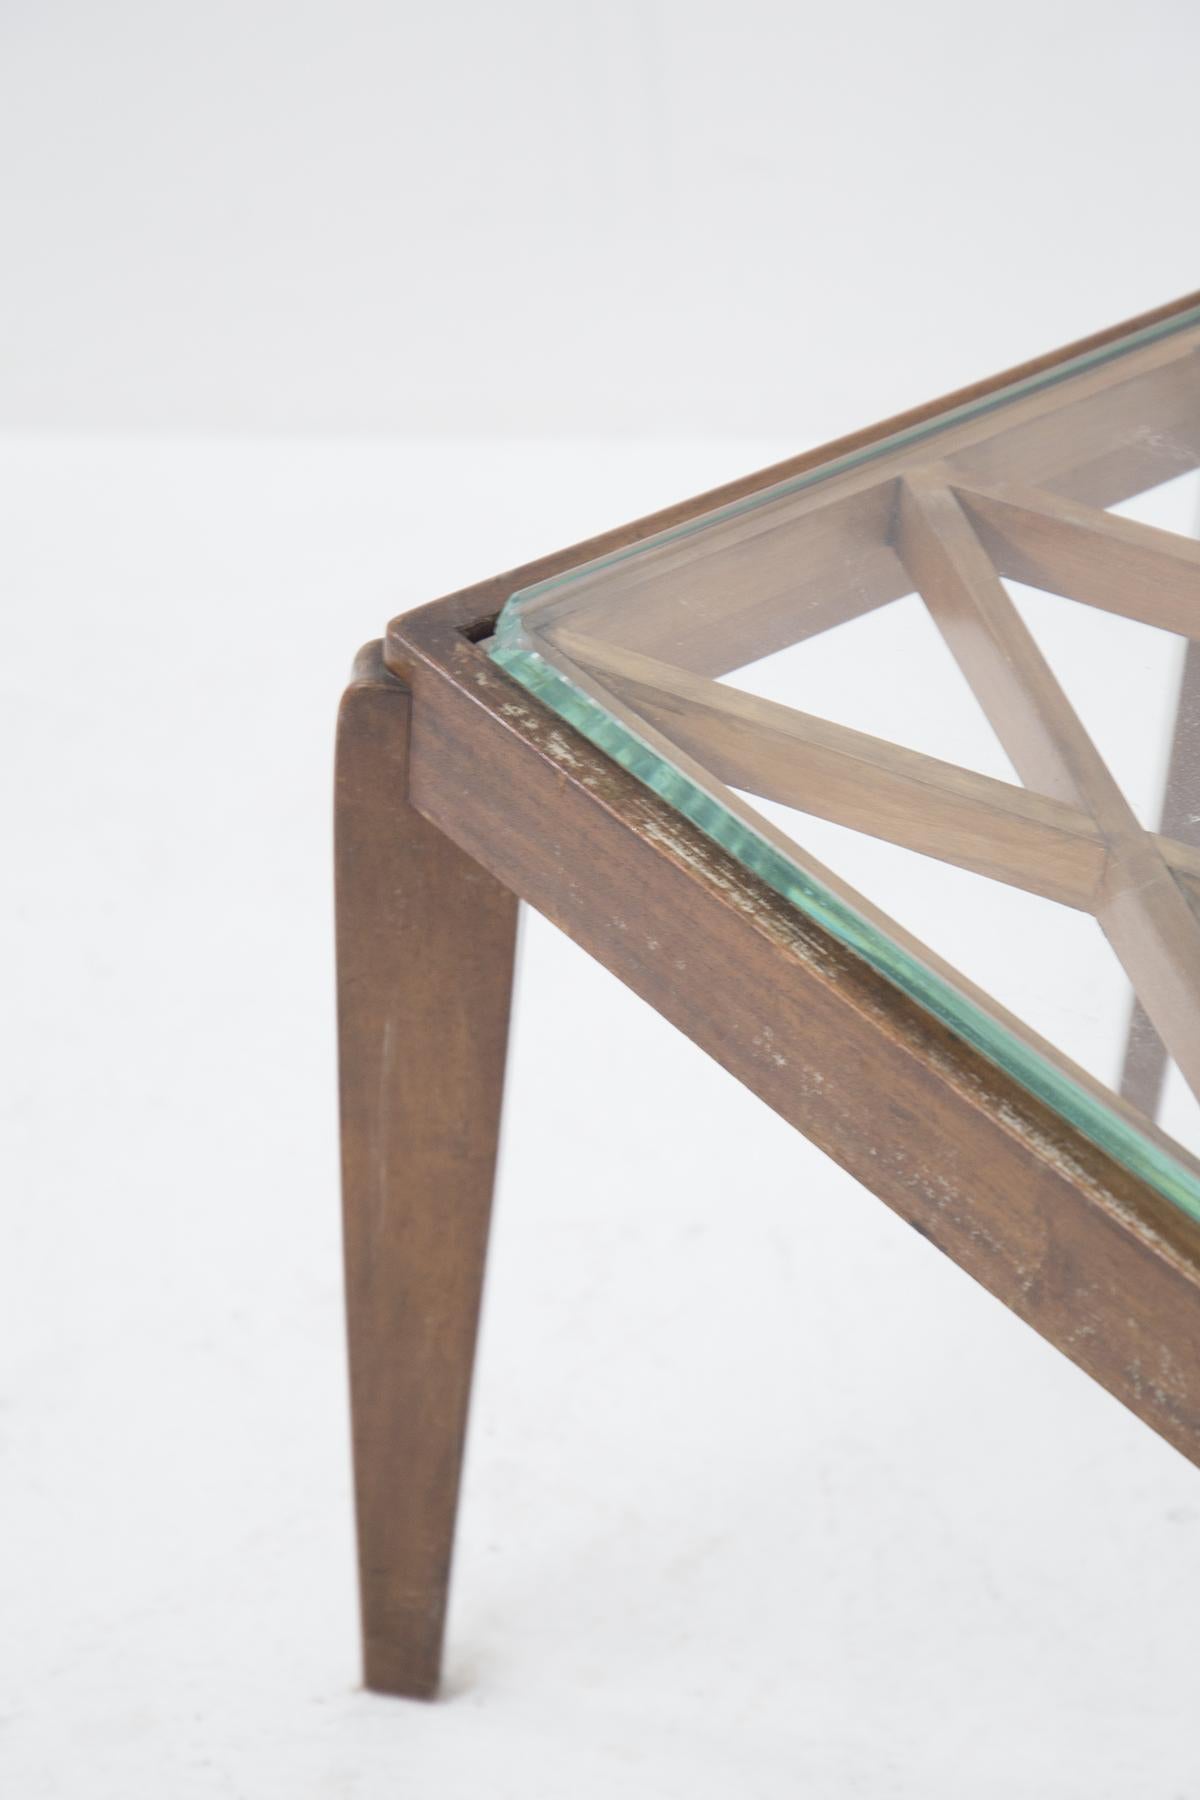 Beautiful vintage coffee table of fine Italian manufacture, attributed to the great Italian designer Paolo Buffa of the 1950s.
The wooden frame is very elegant with simple and rigid lines.
The table top features a geometric diamond pattern made of